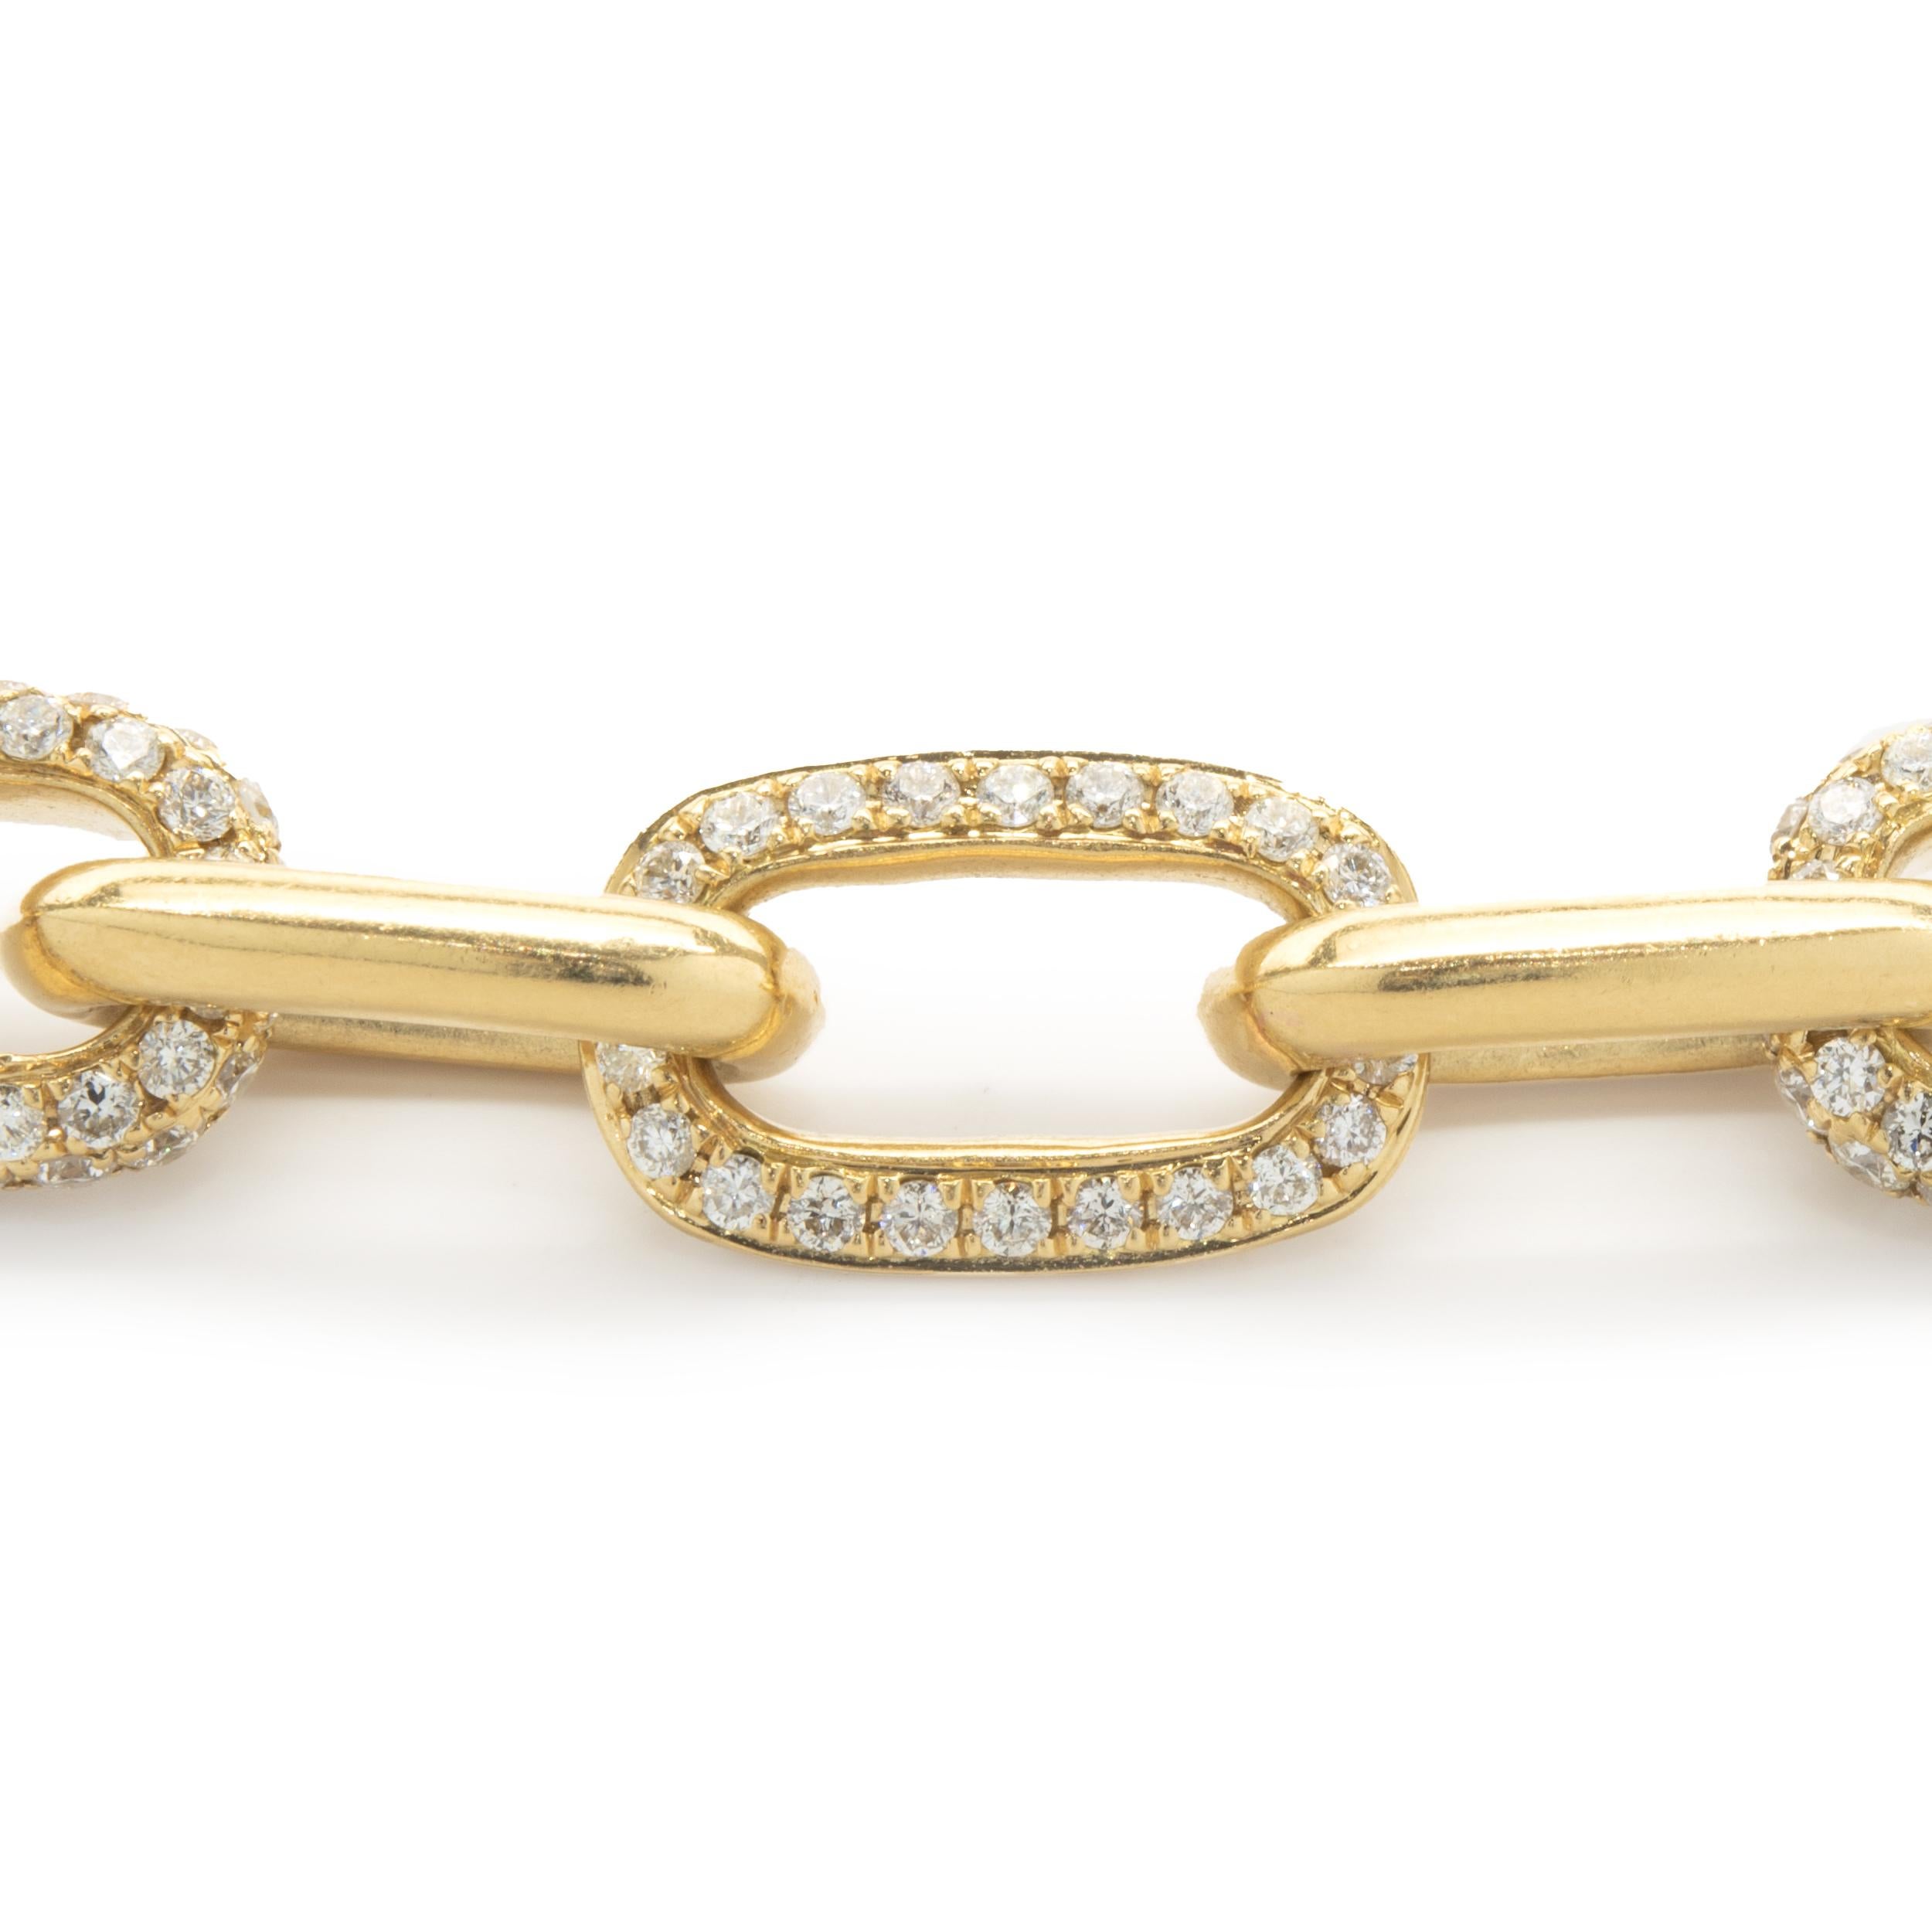 Designer: custom design
Material: 18K yellow gold
Diamonds: 1300 round brilliant cut = 22.75cttw
Color: G
Clarity: VS1-2
Dimensions: necklace measures 18-inches in length 
Weight: 70.81 grams